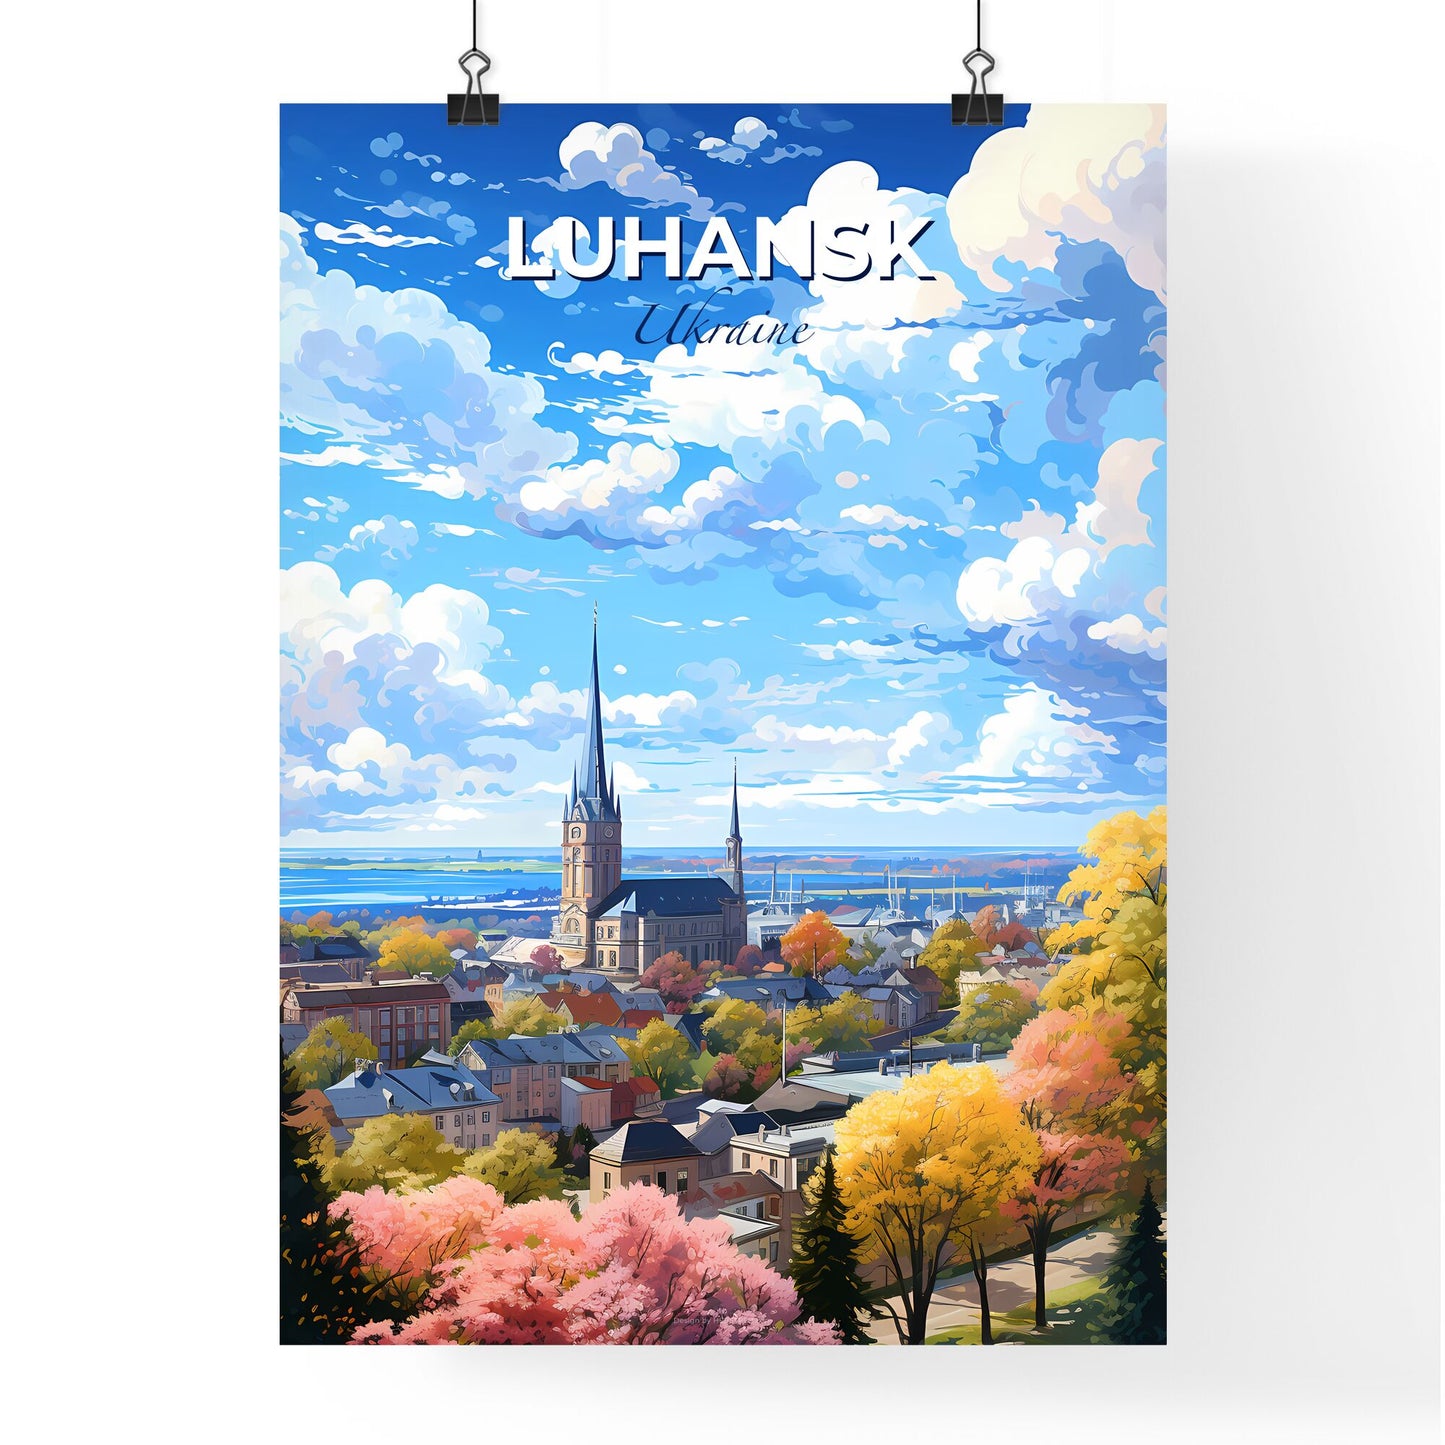 Luhansk Ukraine Skyline - A City With A Church And Trees - Customizable Travel Gift Default Title